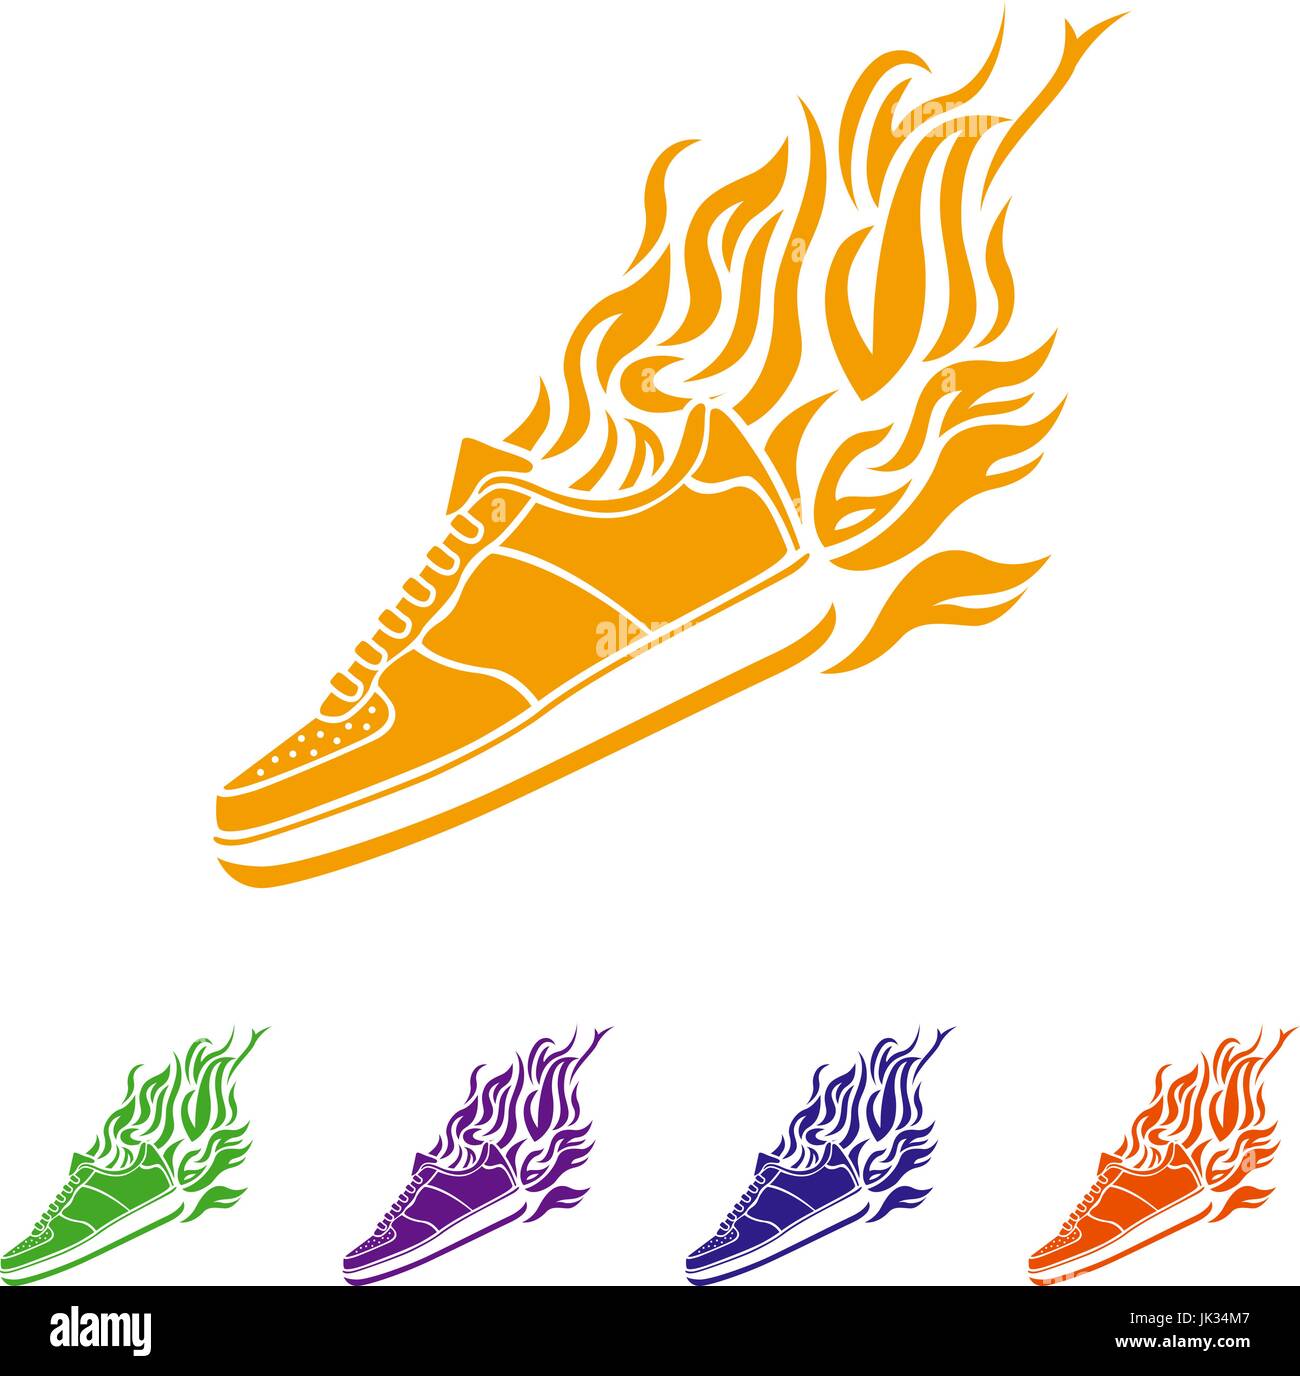 Featured image of post Clip Art Running Shoe Silhouette Silhouette symbol of shoes running and fitness sneakers 2298764